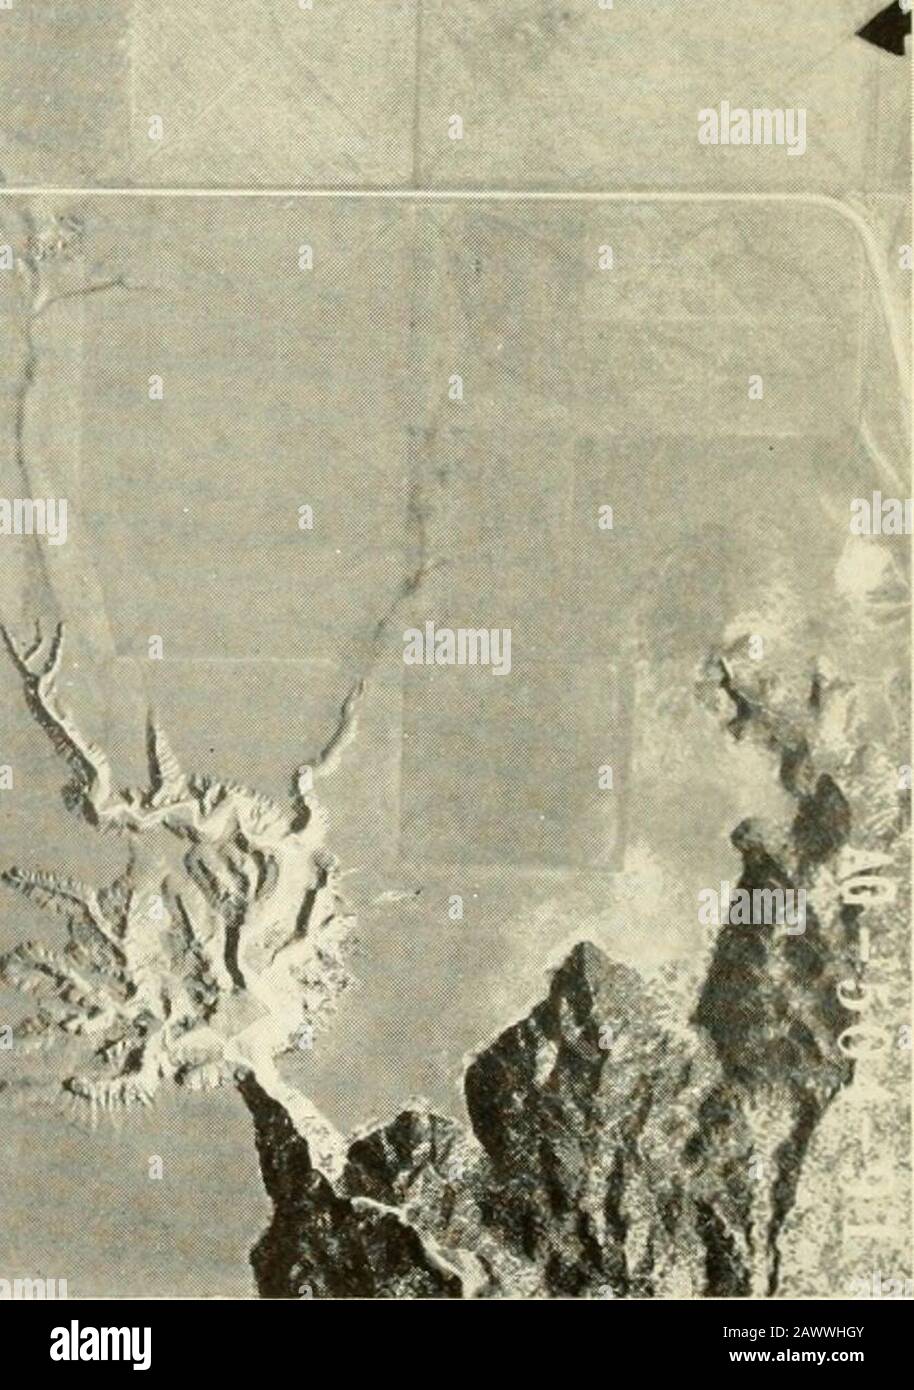 Smithsonian miscellaneous collections . AERIAL PHOTOGRAPH OF THE SAN JON SITE. NORTH TO RIGHT, (Soil Conservation Service photograph.) SMITHSONIAN MISCELLANEOUS COLLECTIONSVOLUME 121, NUMBER 1 GEOLOGY OF THE SAN JONSITE, EASTERN NEW MEXICO (With 5 Plates) BY SHELDON JUDSON University of Wisconsin Stock Photo